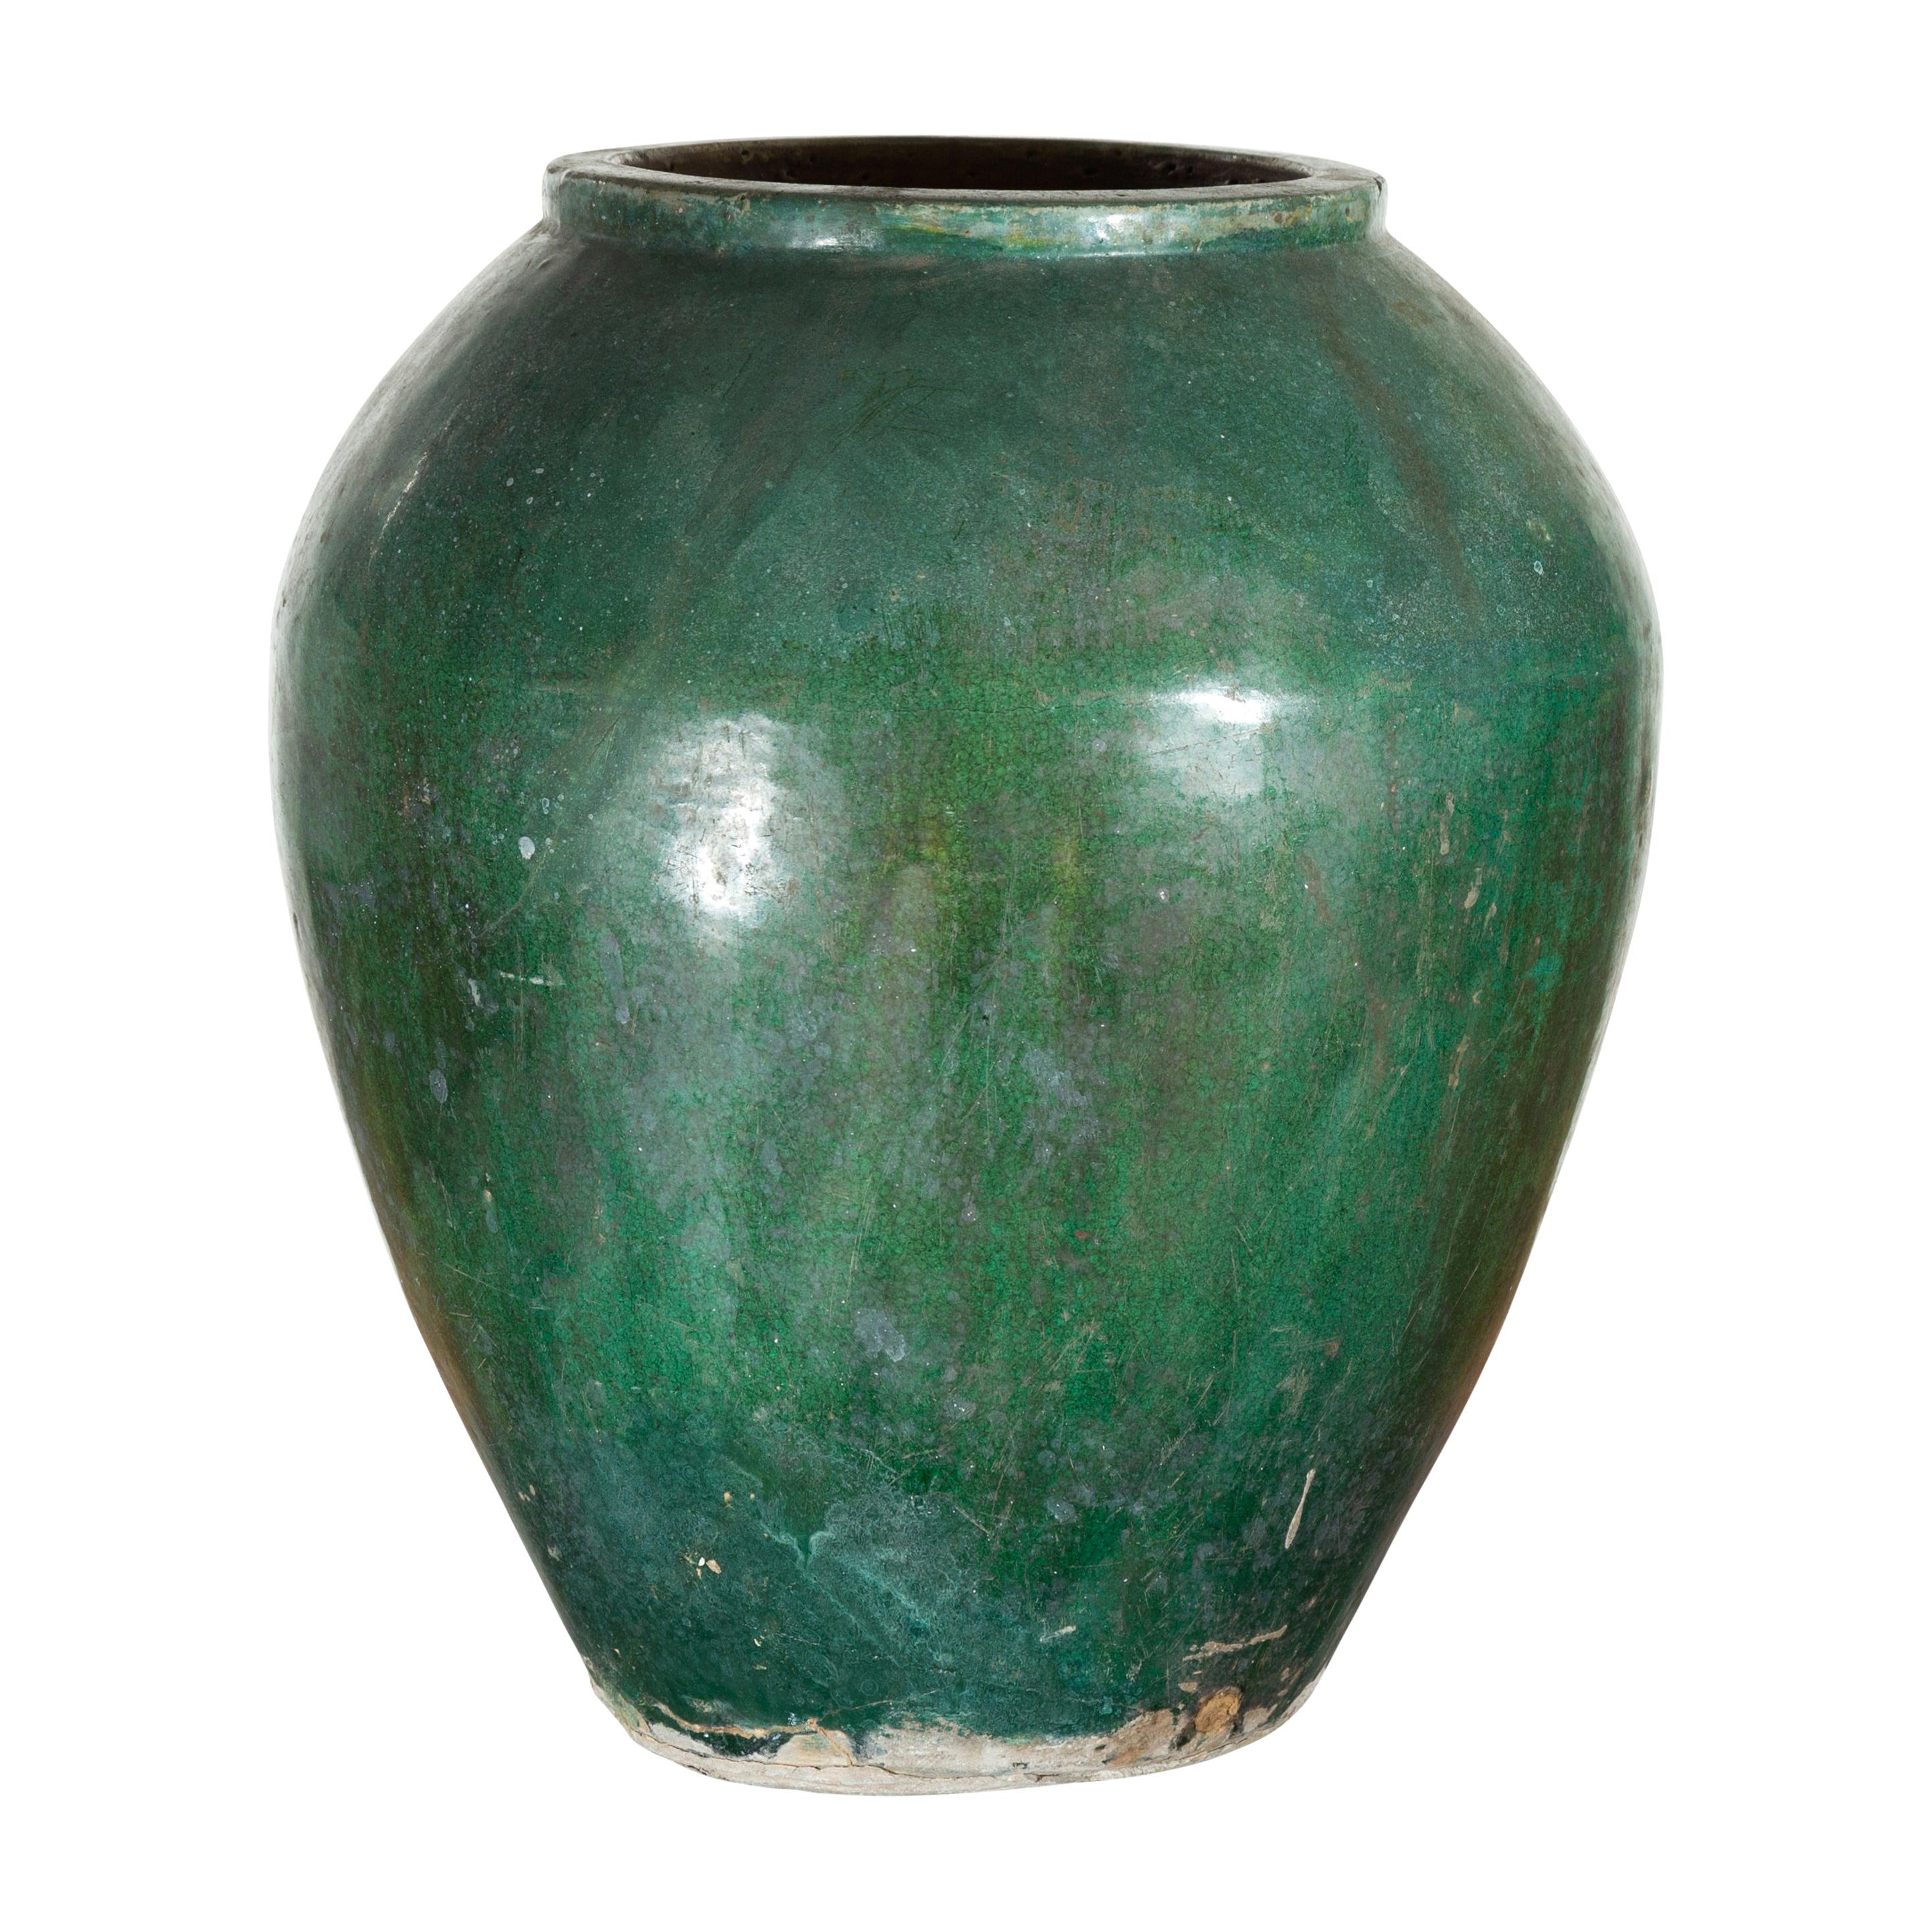 Chinese Vintage Water Jar with Verde Patina and Weathered Appearance